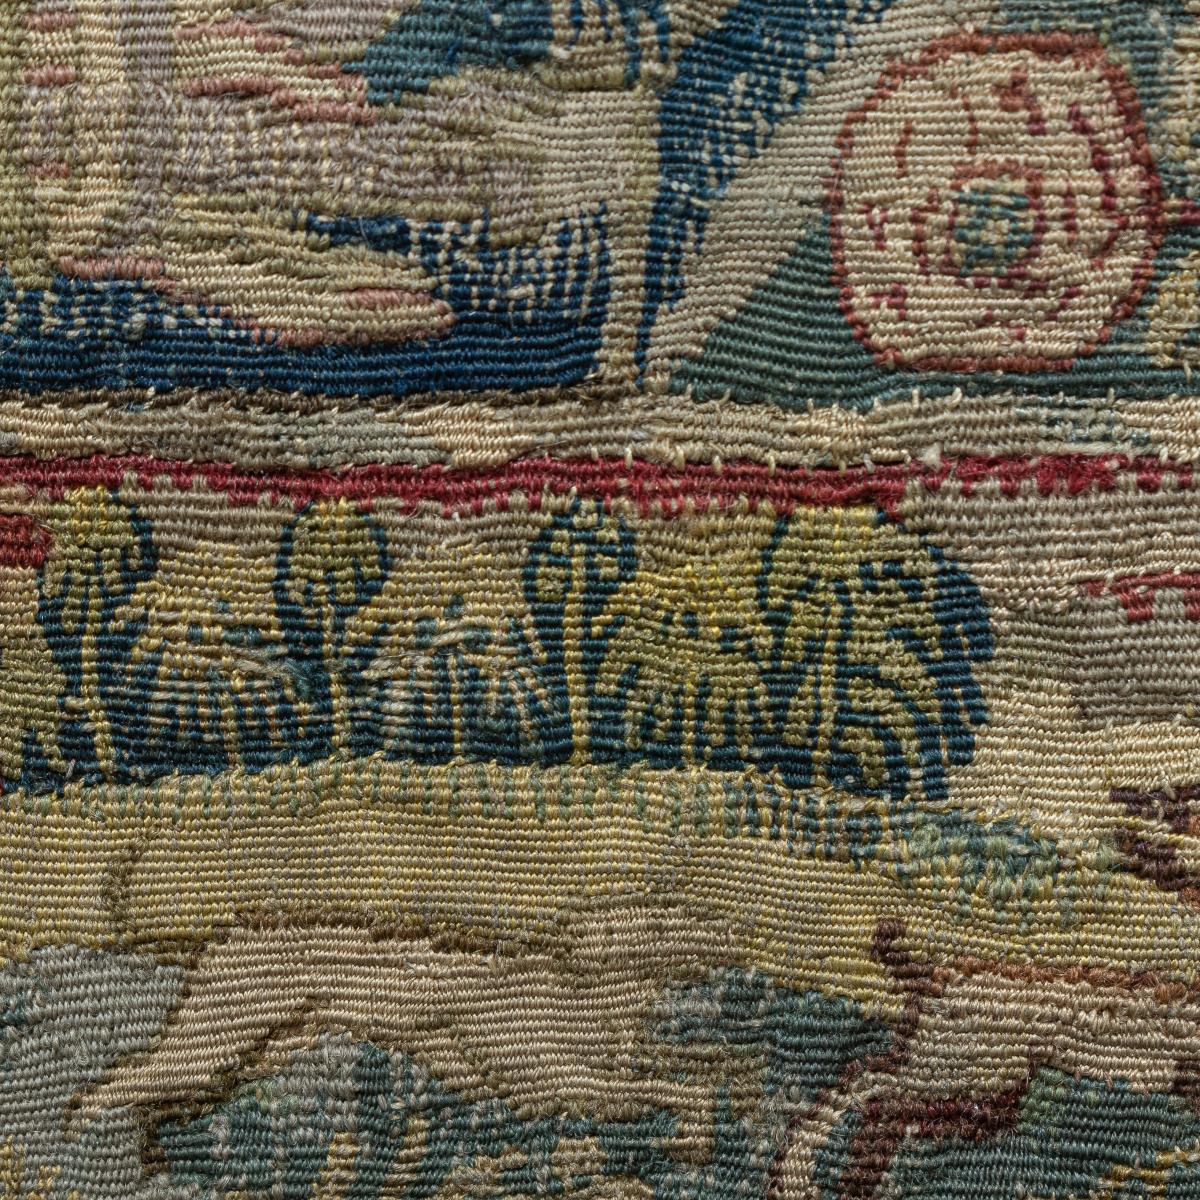 An antique tapestry cushion cover in a frame